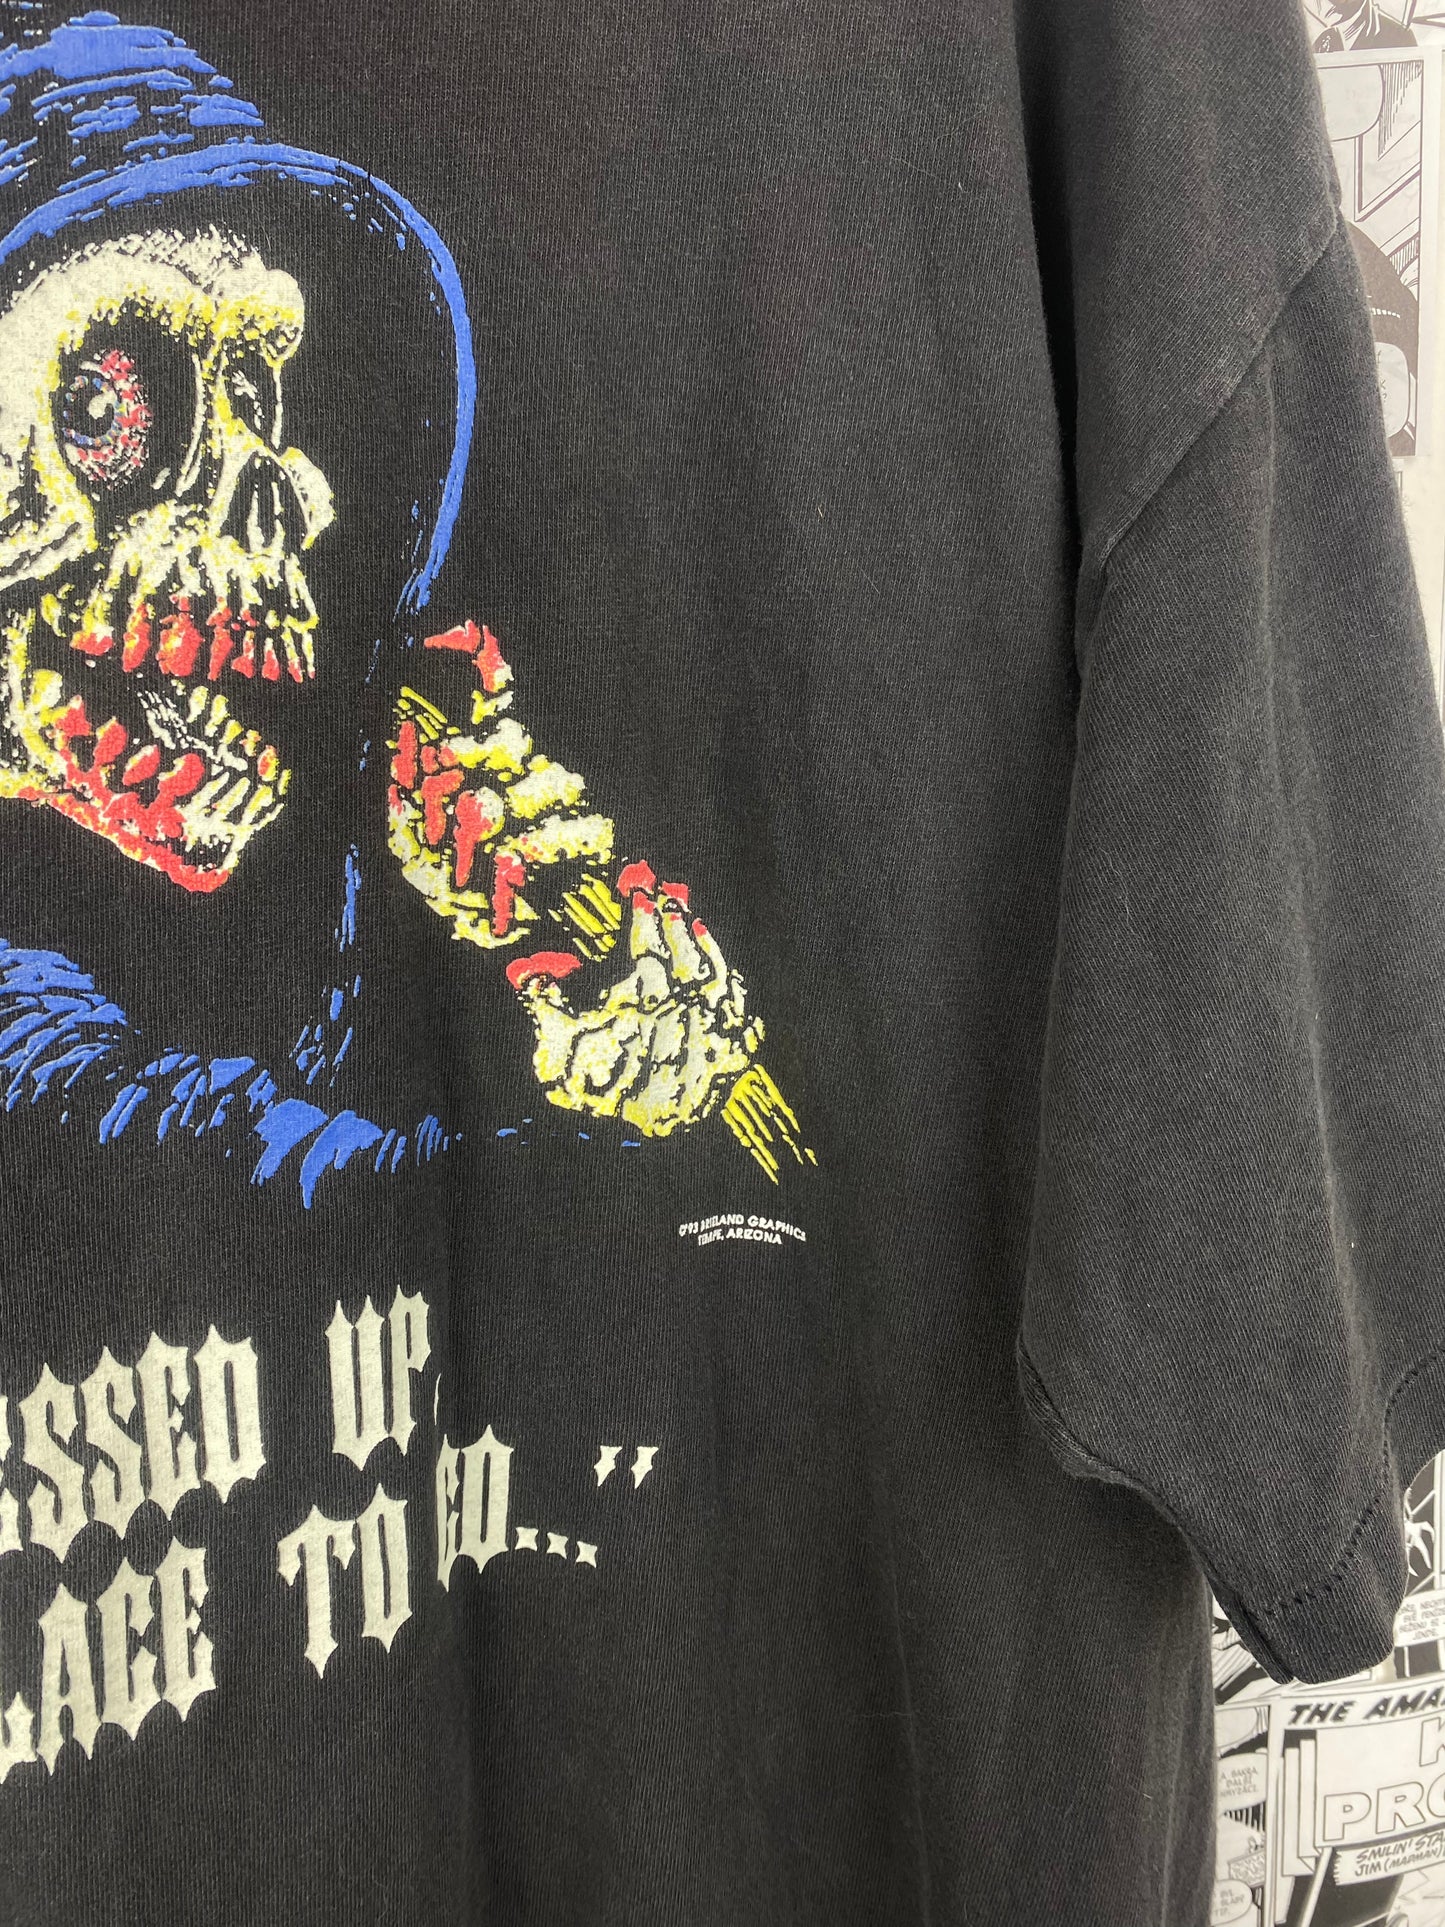 Vintage “All dressed up, with nowhere to go” death t-shirt - size XL